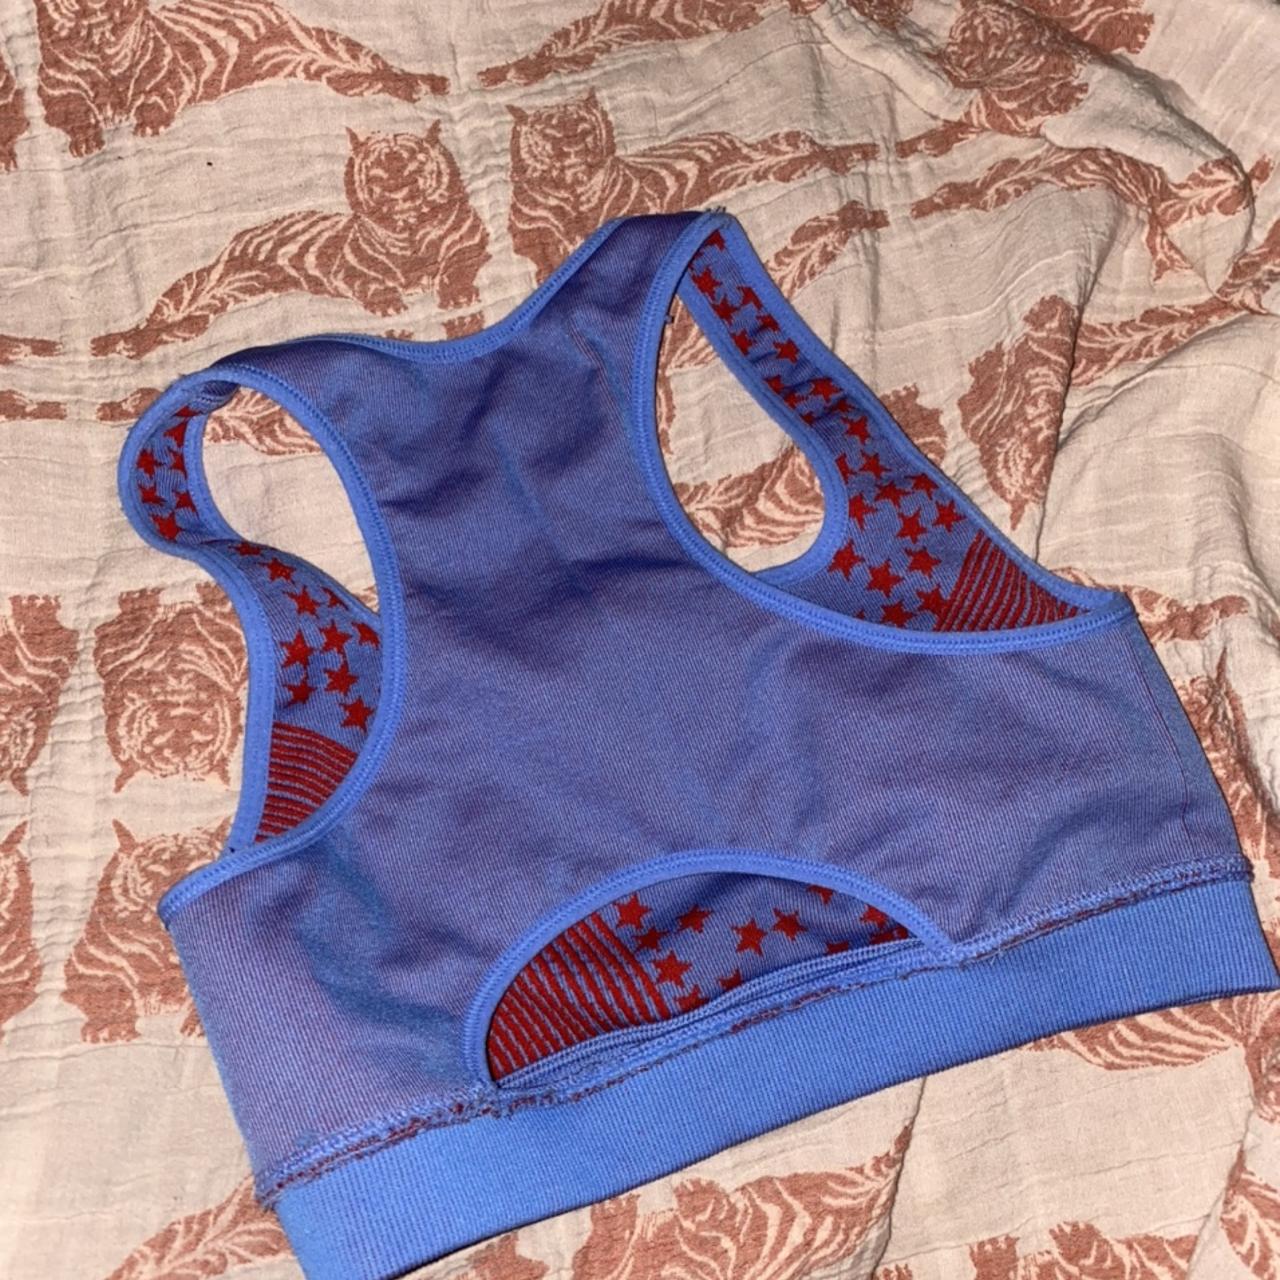 Product Image 4 - ✨Fabletics star sports bra✨

*seamless 

💕Shipping:$5.45💕